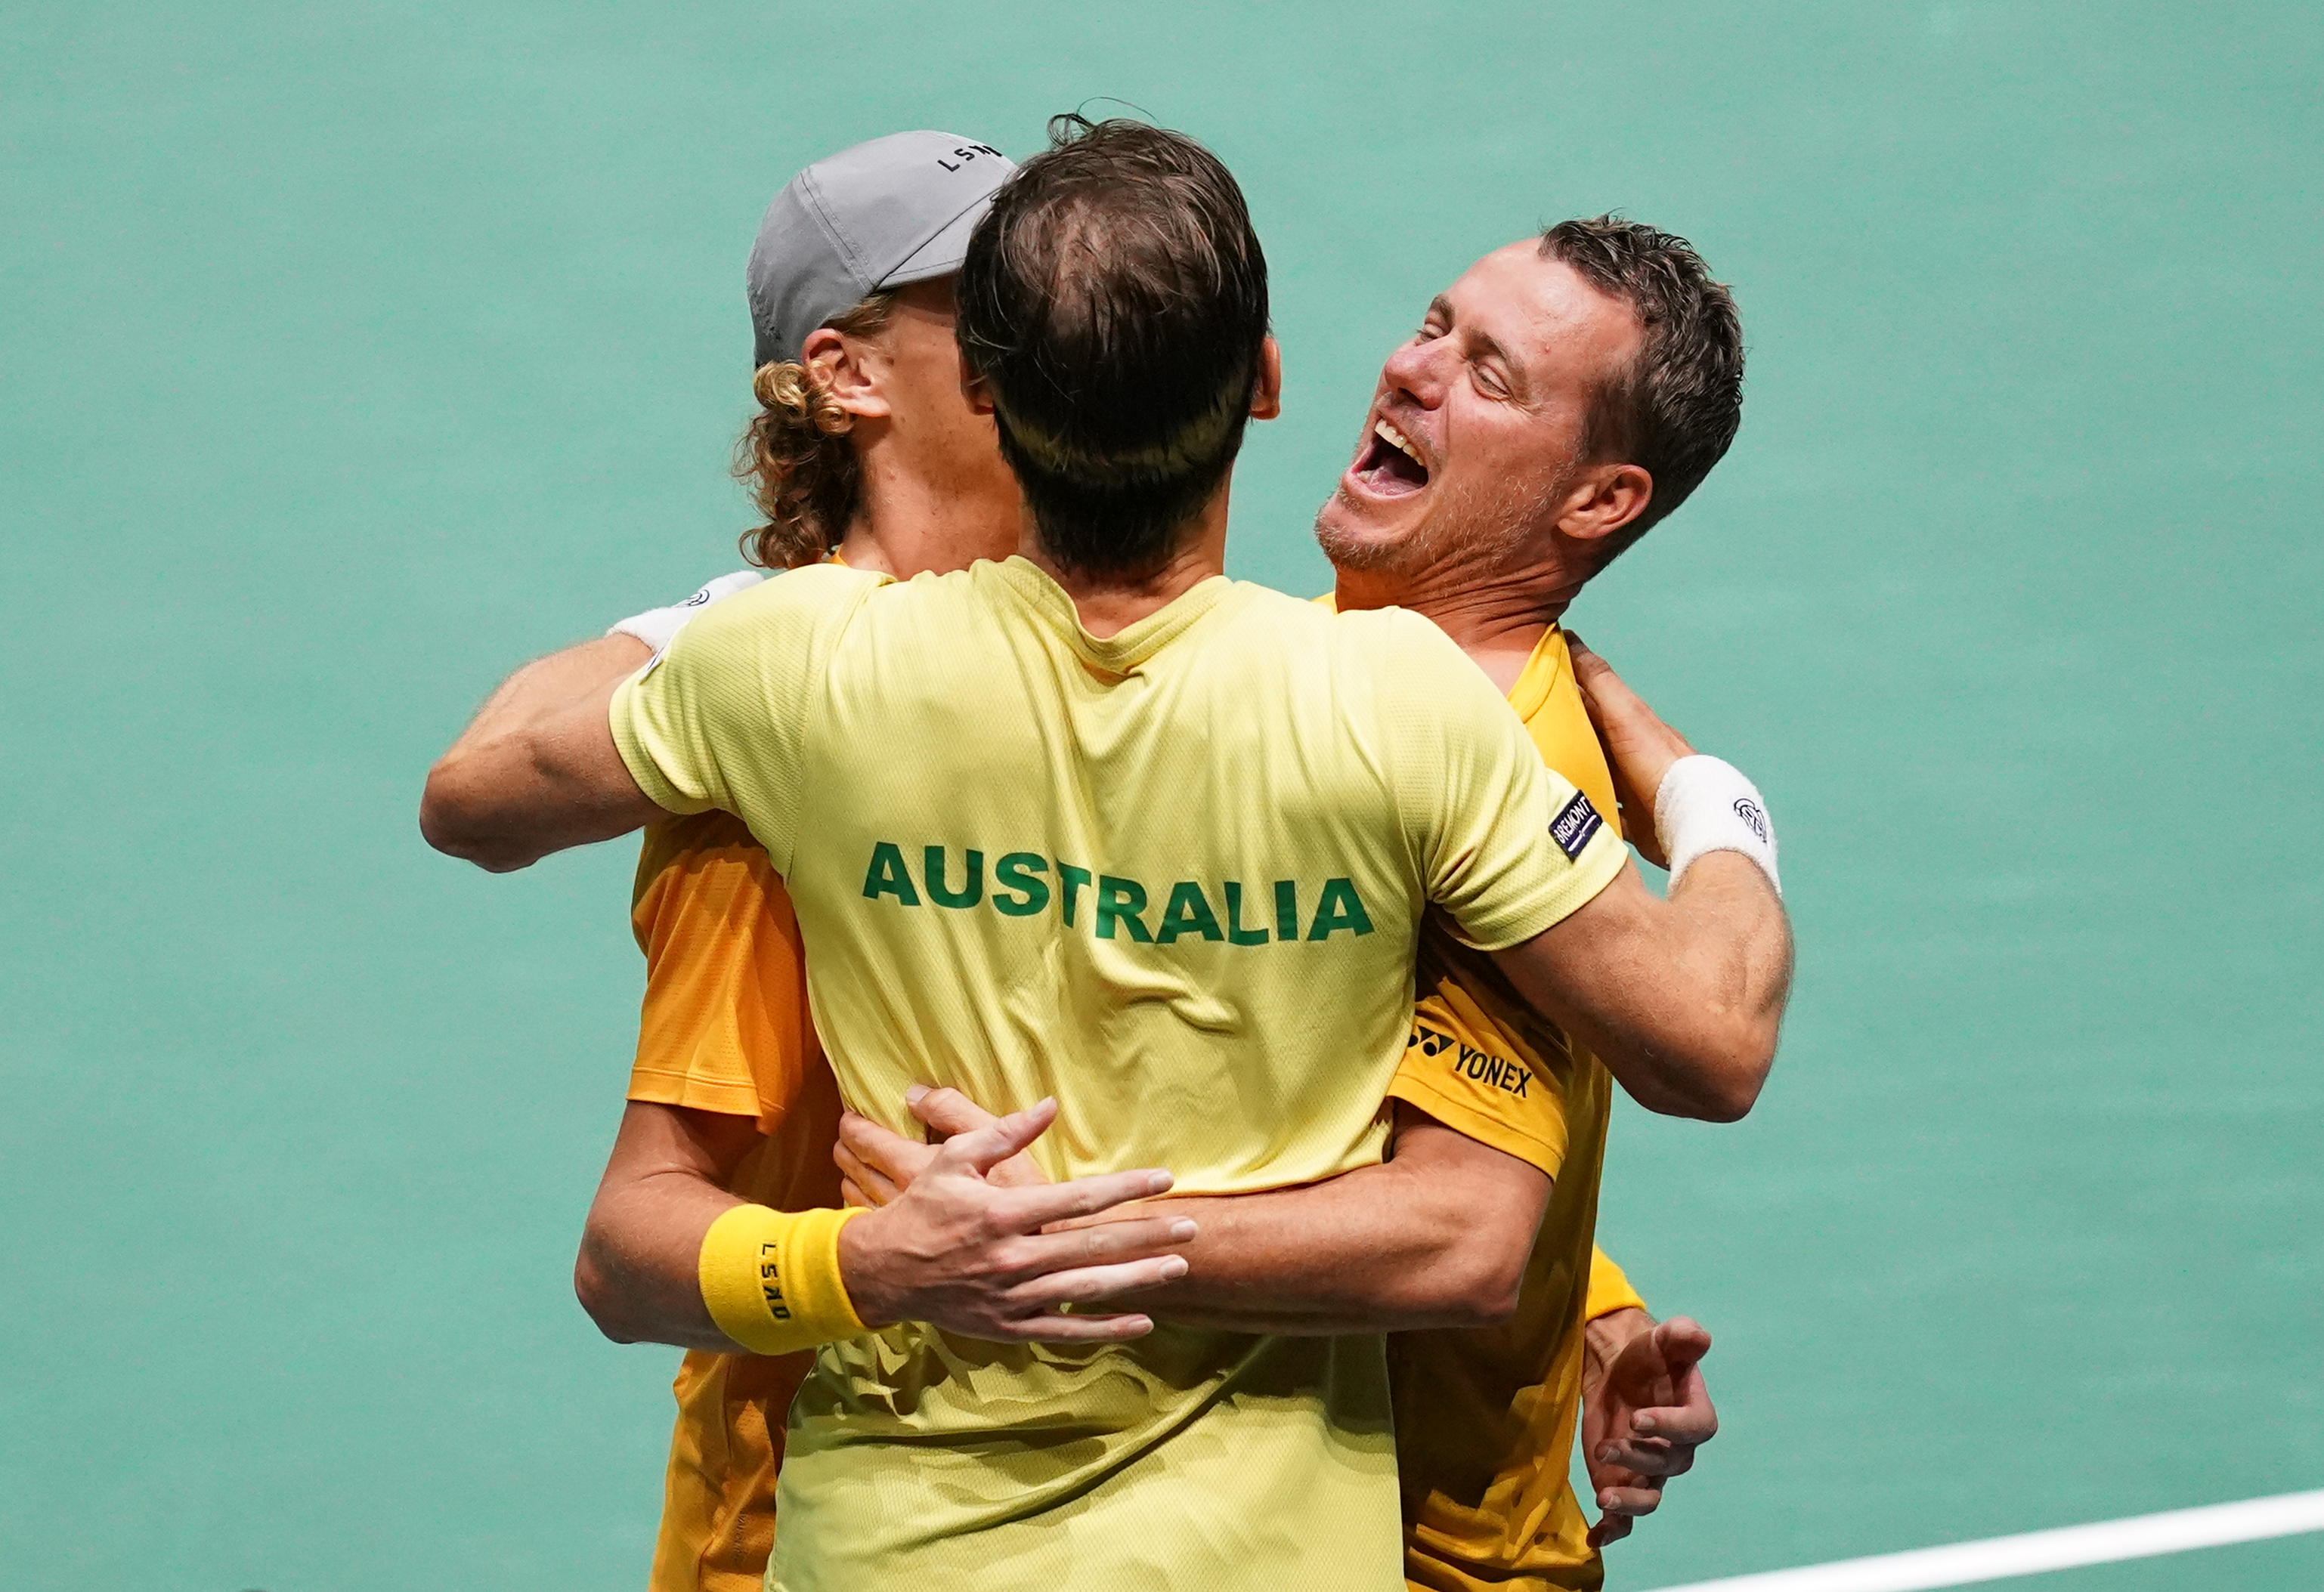 Australia are through to the final stage